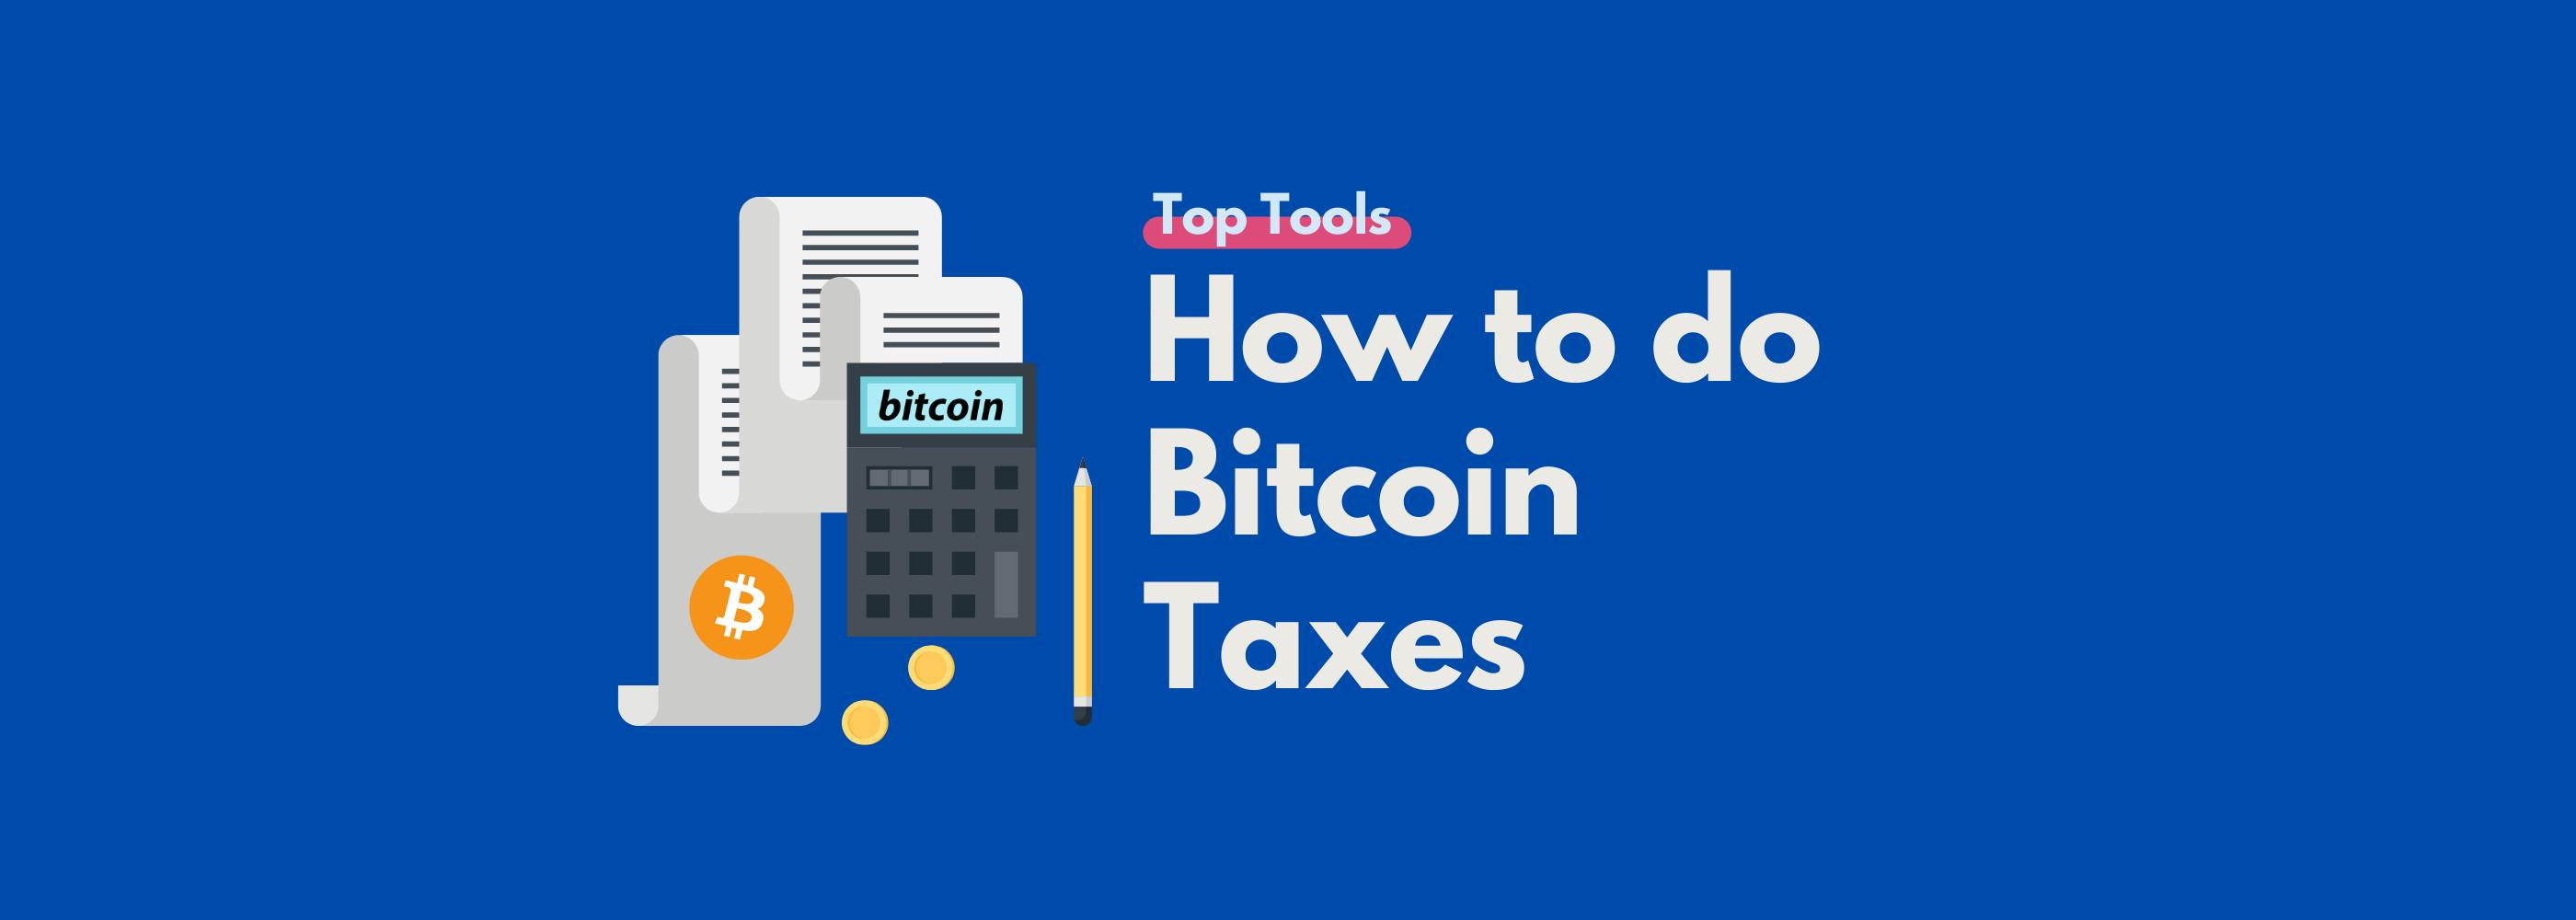 buying and selling bitcoin taxes